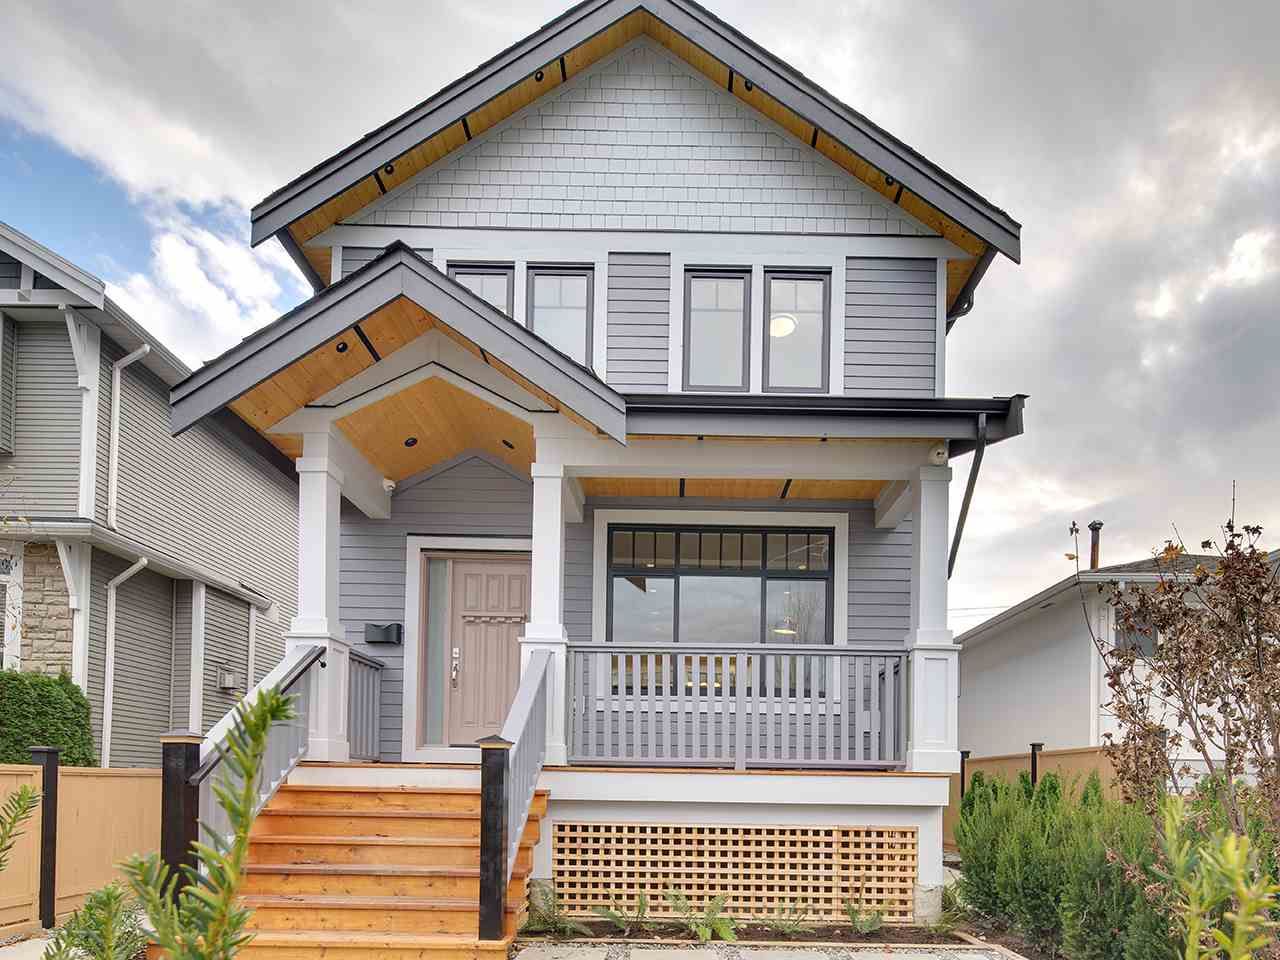 Main Photo: 1522 E PENDER Street in Vancouver: Hastings 1/2 Duplex for sale (Vancouver East)  : MLS®# R2122104